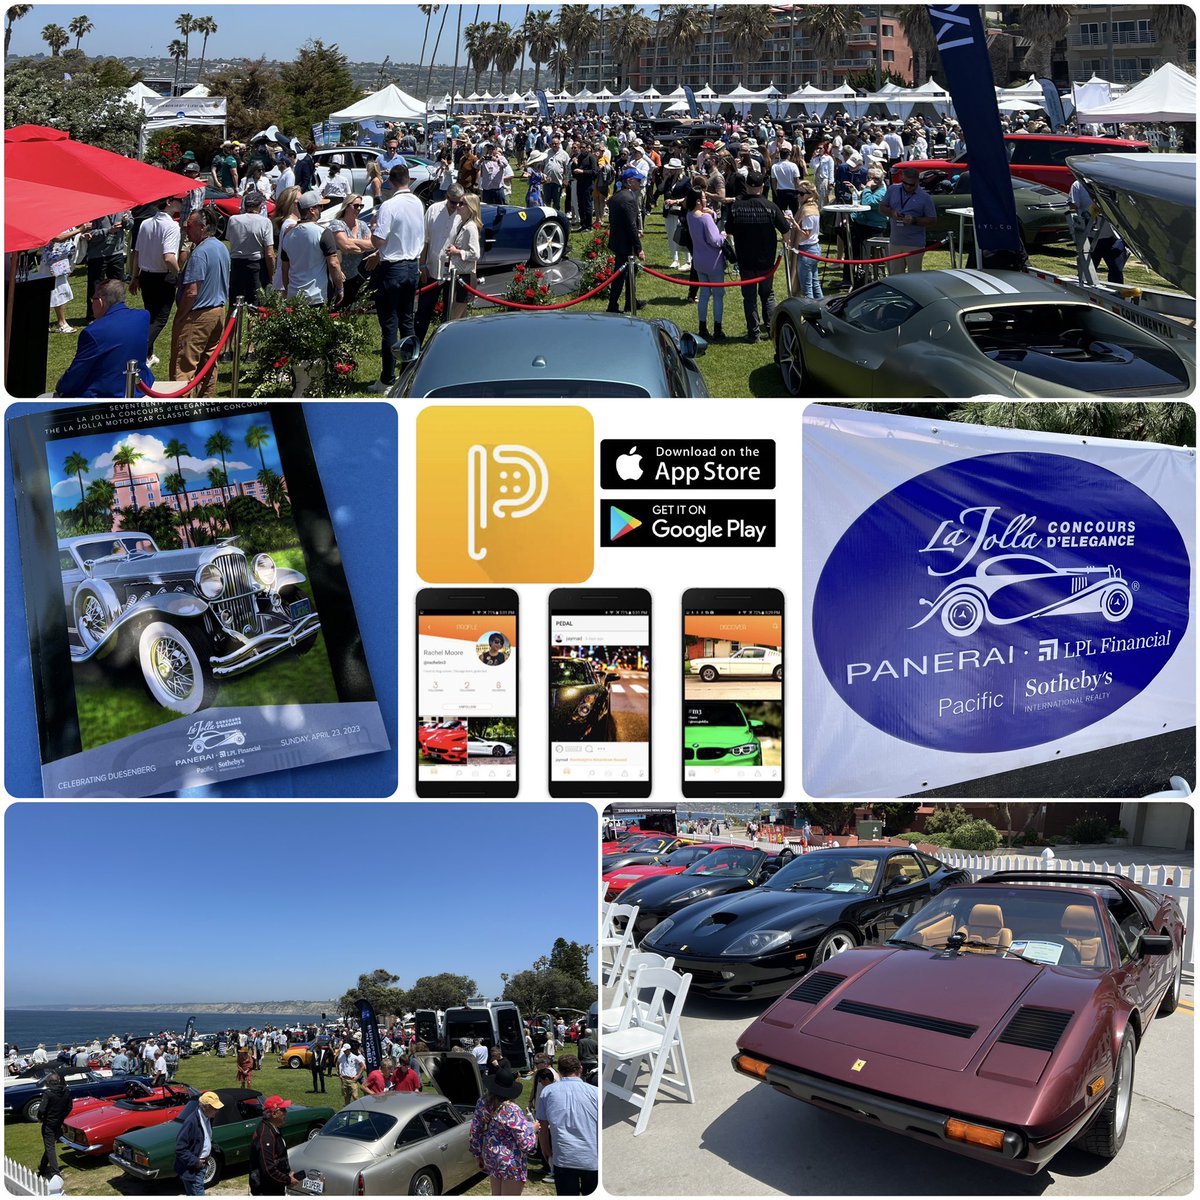 🔶 @LaJollaConcours 🔶 Get PEDAL - Free in app stores 🔶 PEDAL is a free, must have automotive enthusiast picture & video sharing app #lajolla #lajollaconcours #lajollaconcoursdelegance #concours #concoursdelegance #carshow